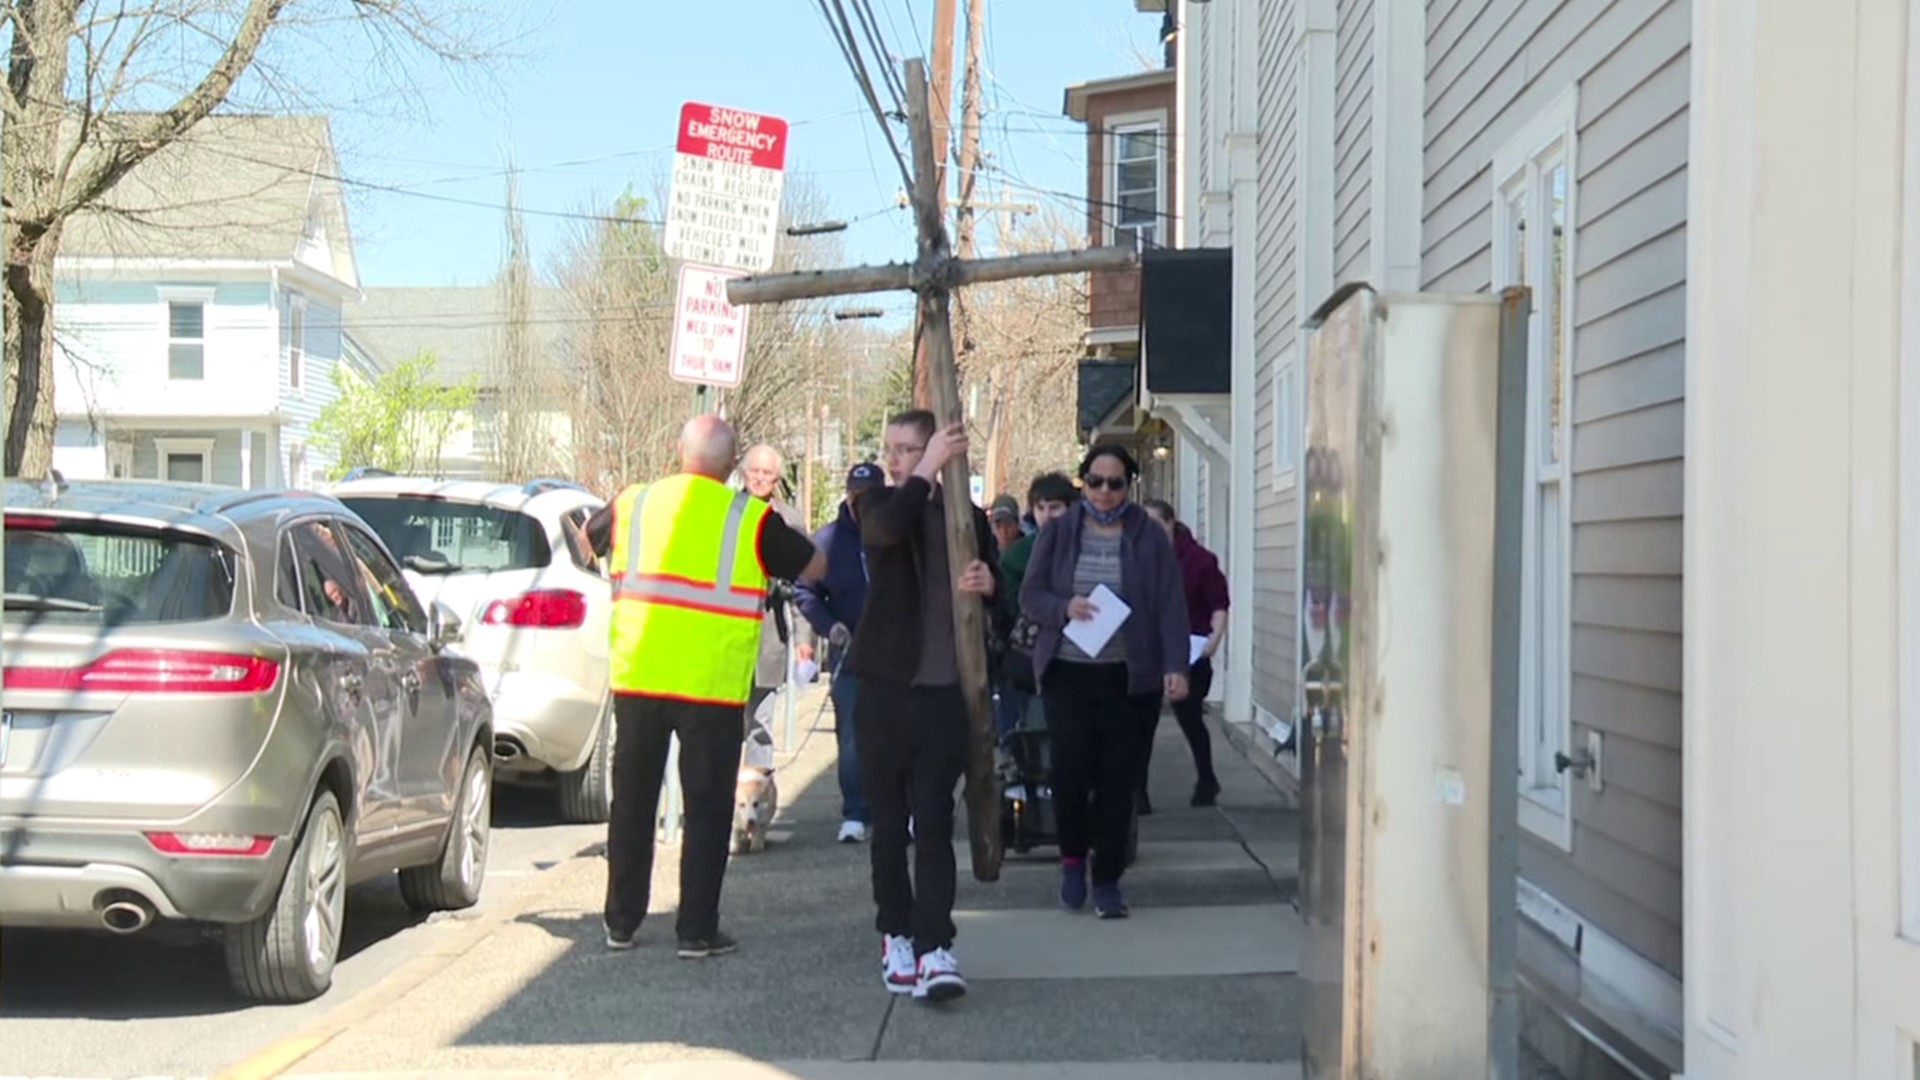 More than 100 worshippers from churches throughout the Stroudsburg area participated in the annual 'Walk for Christ', recreating the Stations of the Cross.